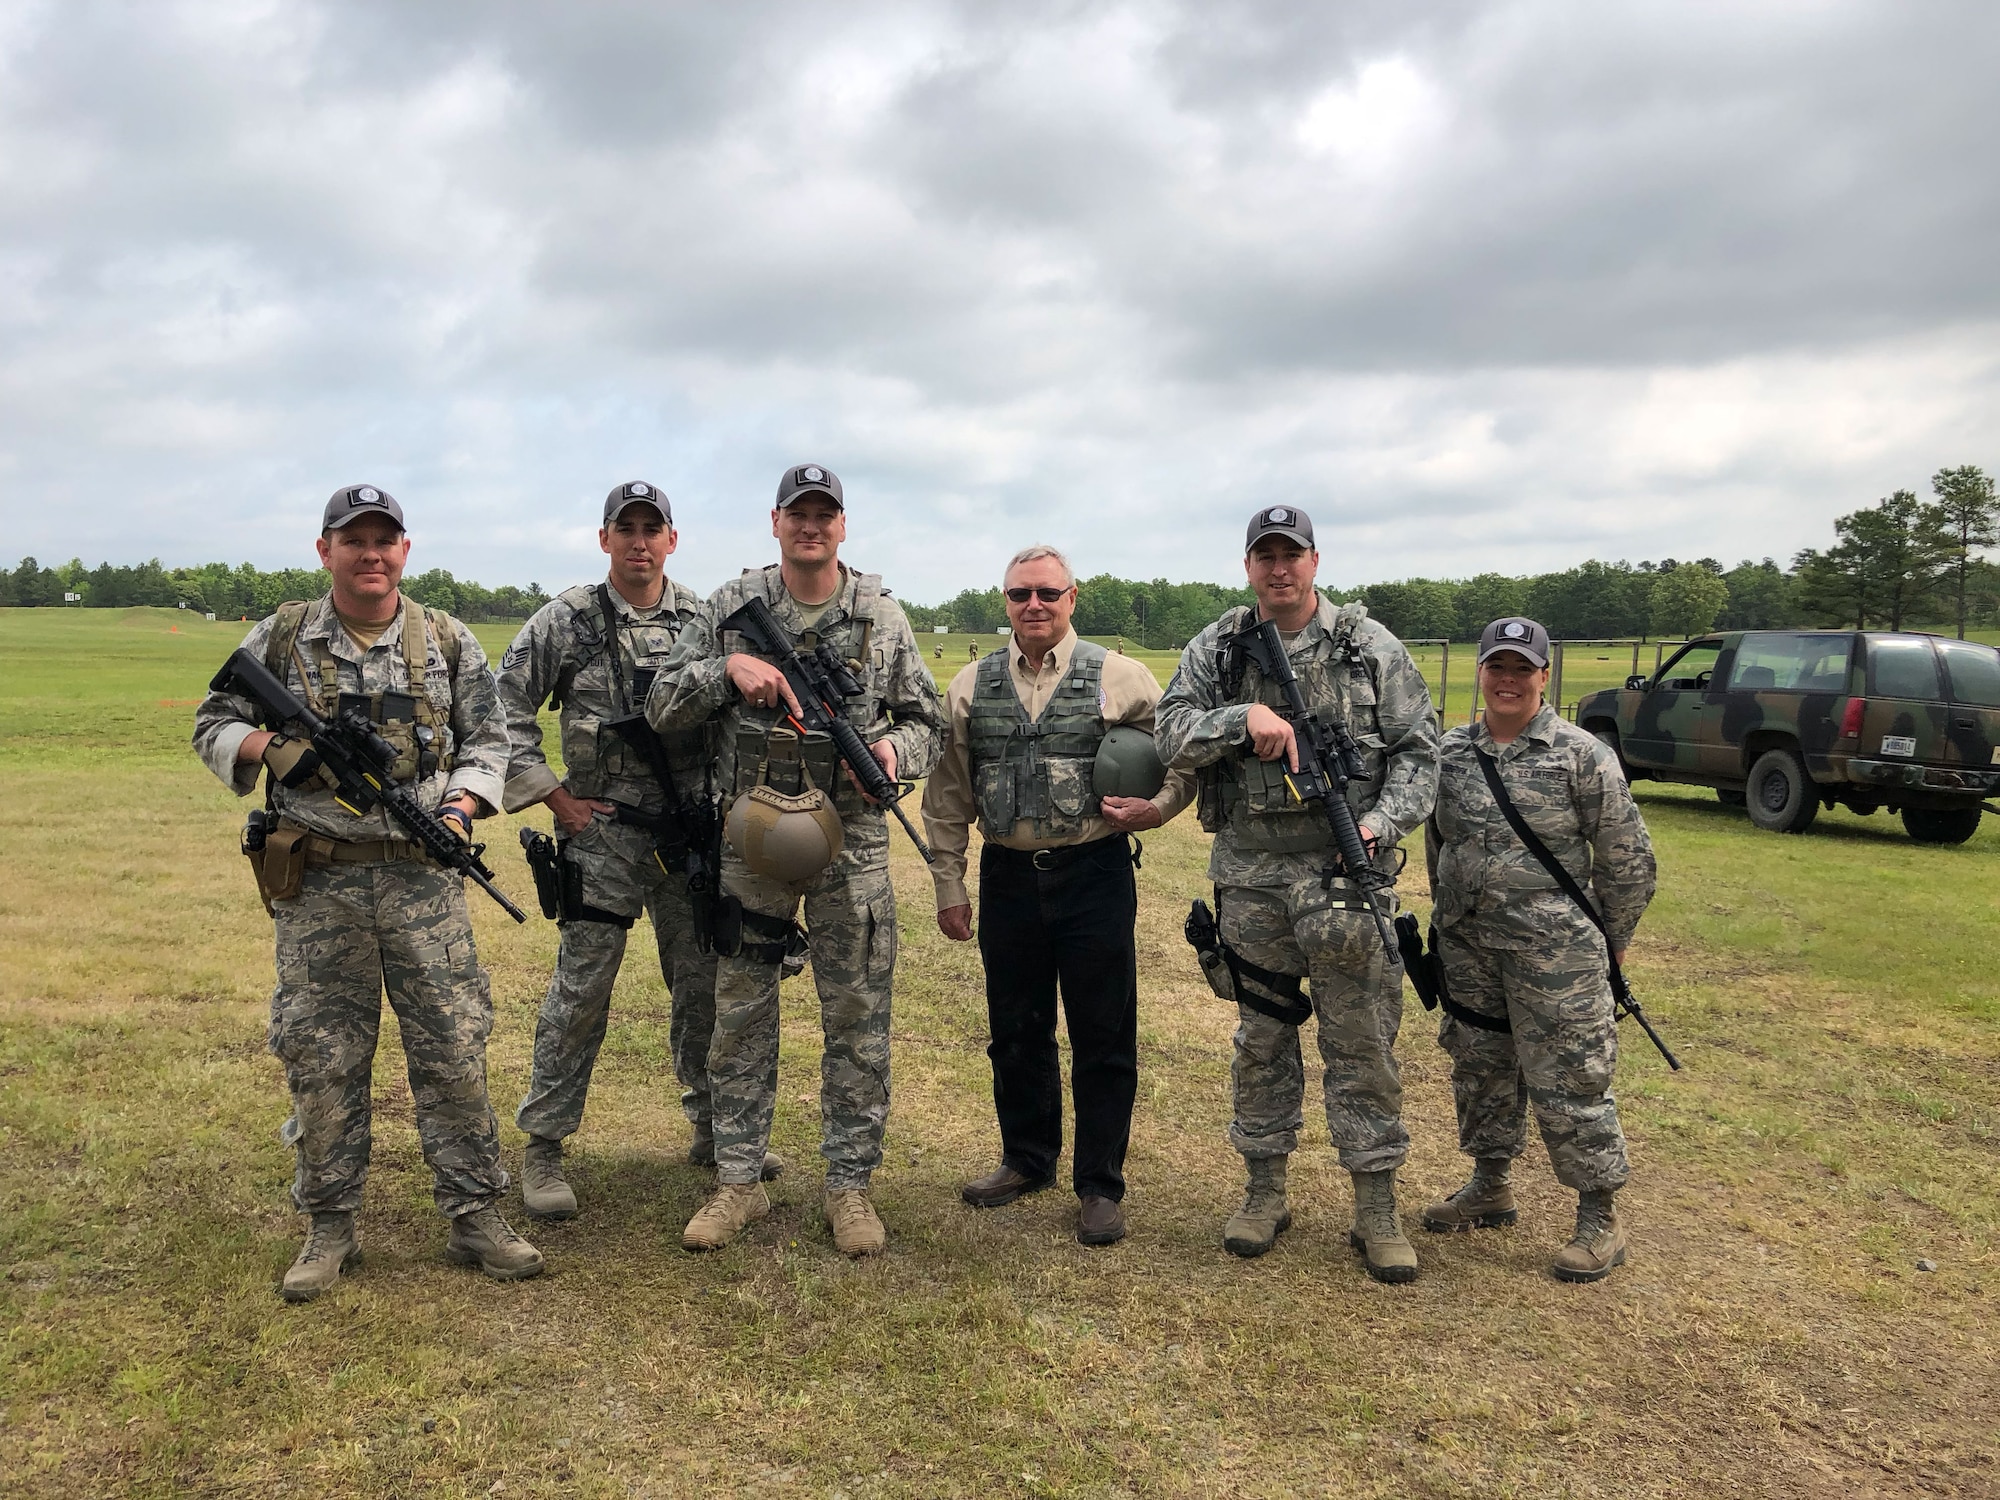 Master Sgt. Christopher Martin, left to right, 242nd Combat Communications Squadron first sergeant and team captain, Staff Sgt. Caleb Gutting, 141st Security Forces Squadron, Maj. Eric Manewal, 194th Wing, Gen. Frank Glass, 28th Chief of National Guard Bureau, Master Sgt. Michael Chapman, 194th Security Forces Squadron, and Staff Sgt. Hope Funderburk, 225th Support Squadron, pose for team picture during the  47th Annual Winston P. Wilson Championship, Robinson Maneuver Training Center, Arkansas, May 2, 2018.  The annual events, hosted by the National Guard Marksmanship Training Center April 29-May 4, 2018, offer Servicemembers from the National Guard and international community an opportunity to test marksmanship skills in a battle-focused environment. (U.S. Air National Guard photo by Staff Sgt. Hope Funderburk)